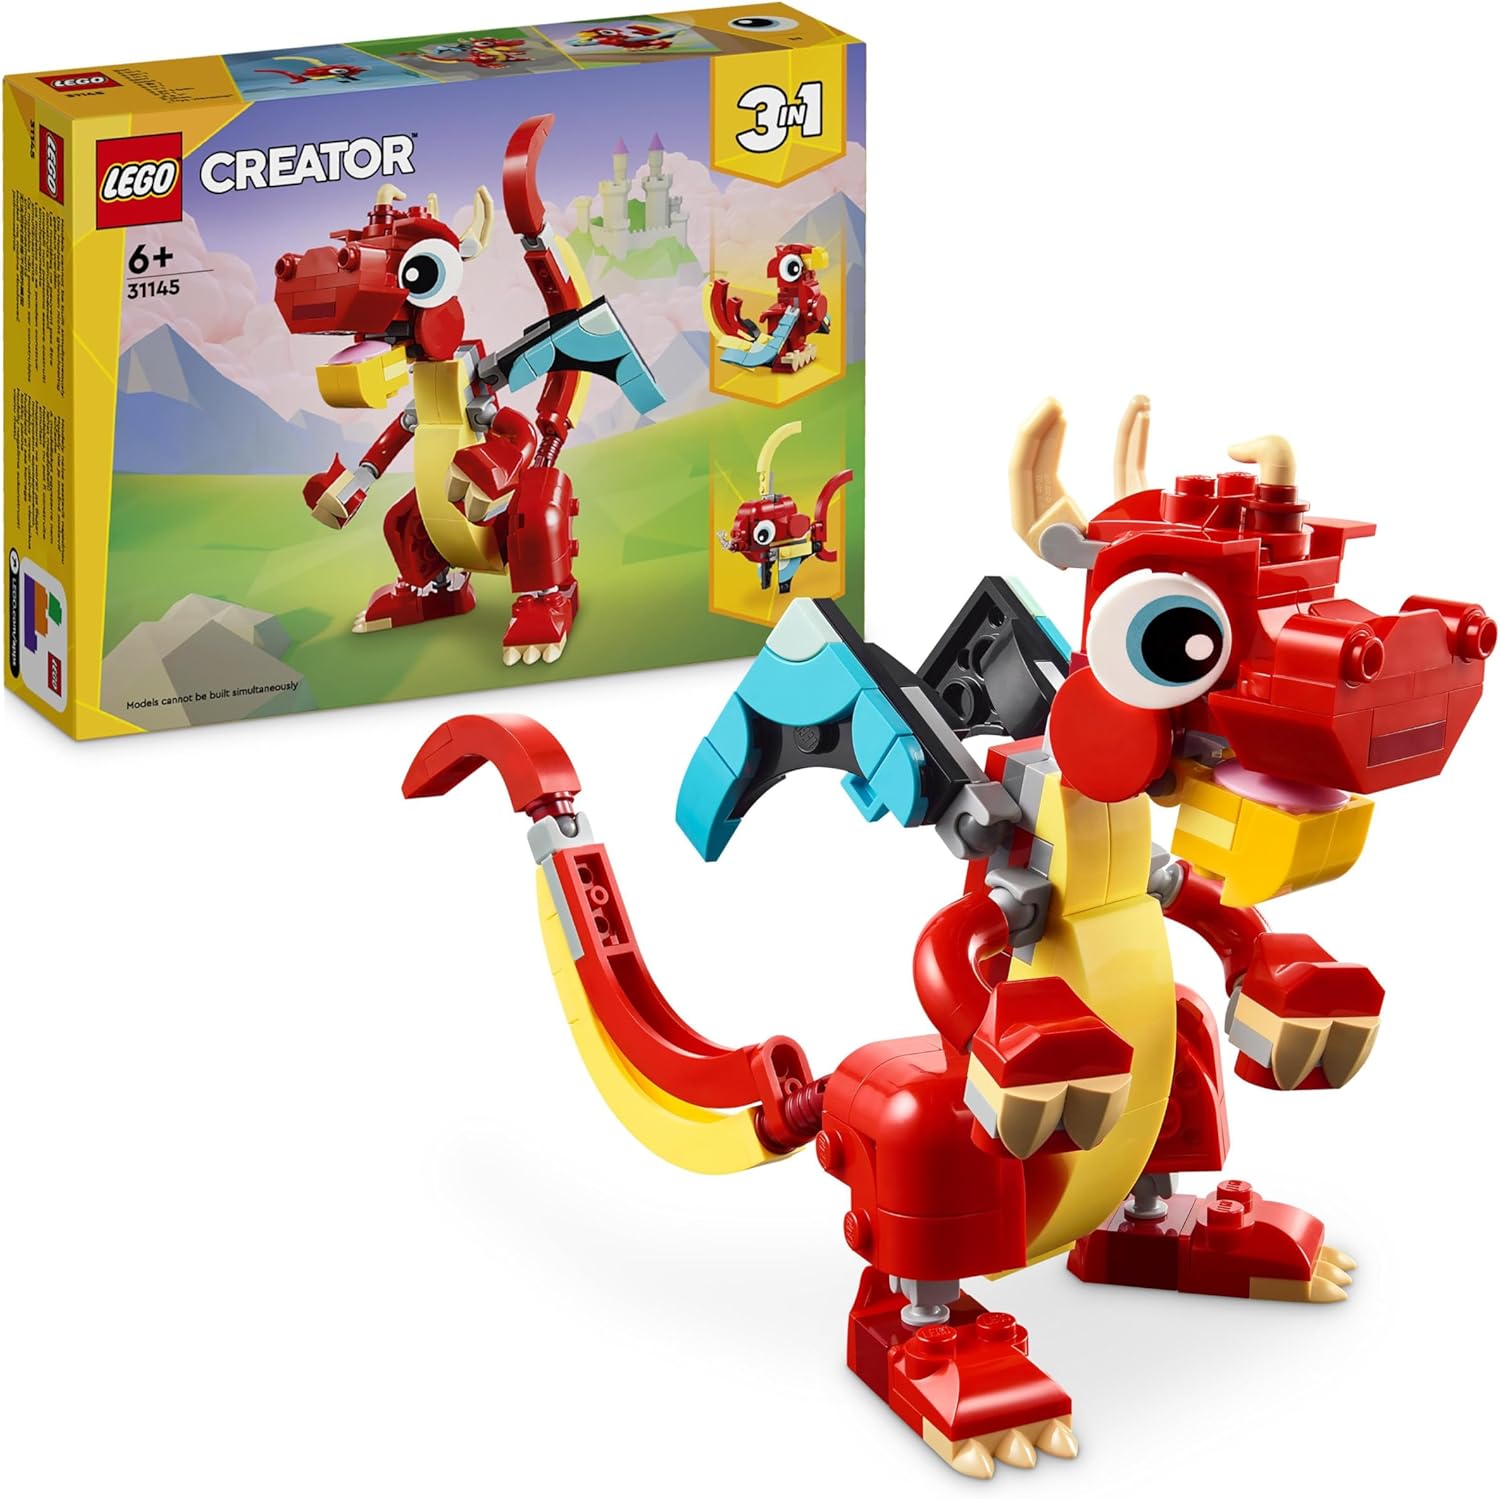 LEGO Creator 31145 3-in-1 Red Dragon, Toy with 3 Animal Figures Including Red Dragon, Fish and Phoenix, Animal Set for Children, Gift for Boys and Girls from 6 Years